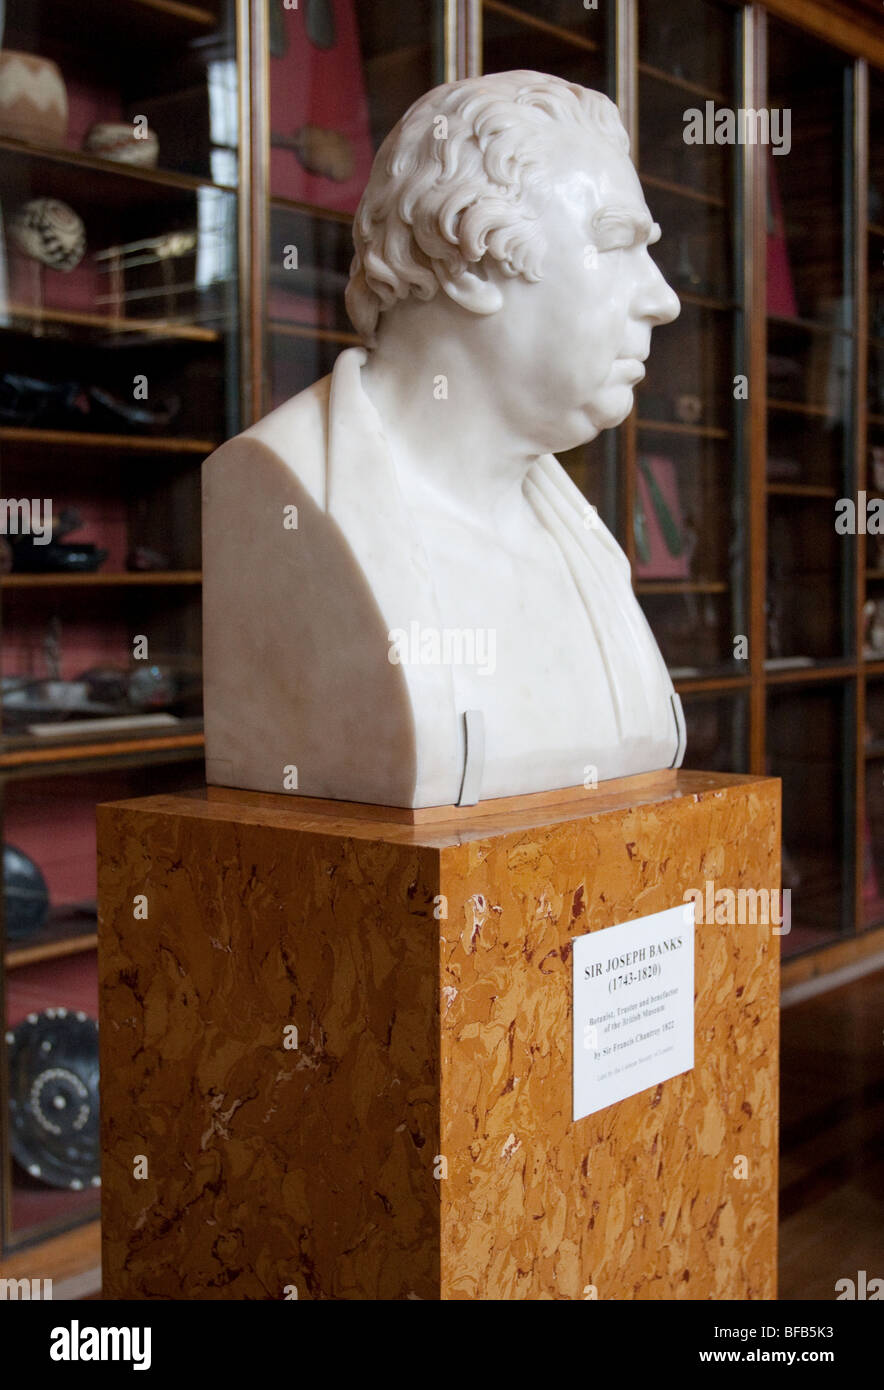 Marble bust of Sir Joseph Banks (1743-1820) botanist, trustee and benefactor of the British Museum, London WC1, England. Stock Photo